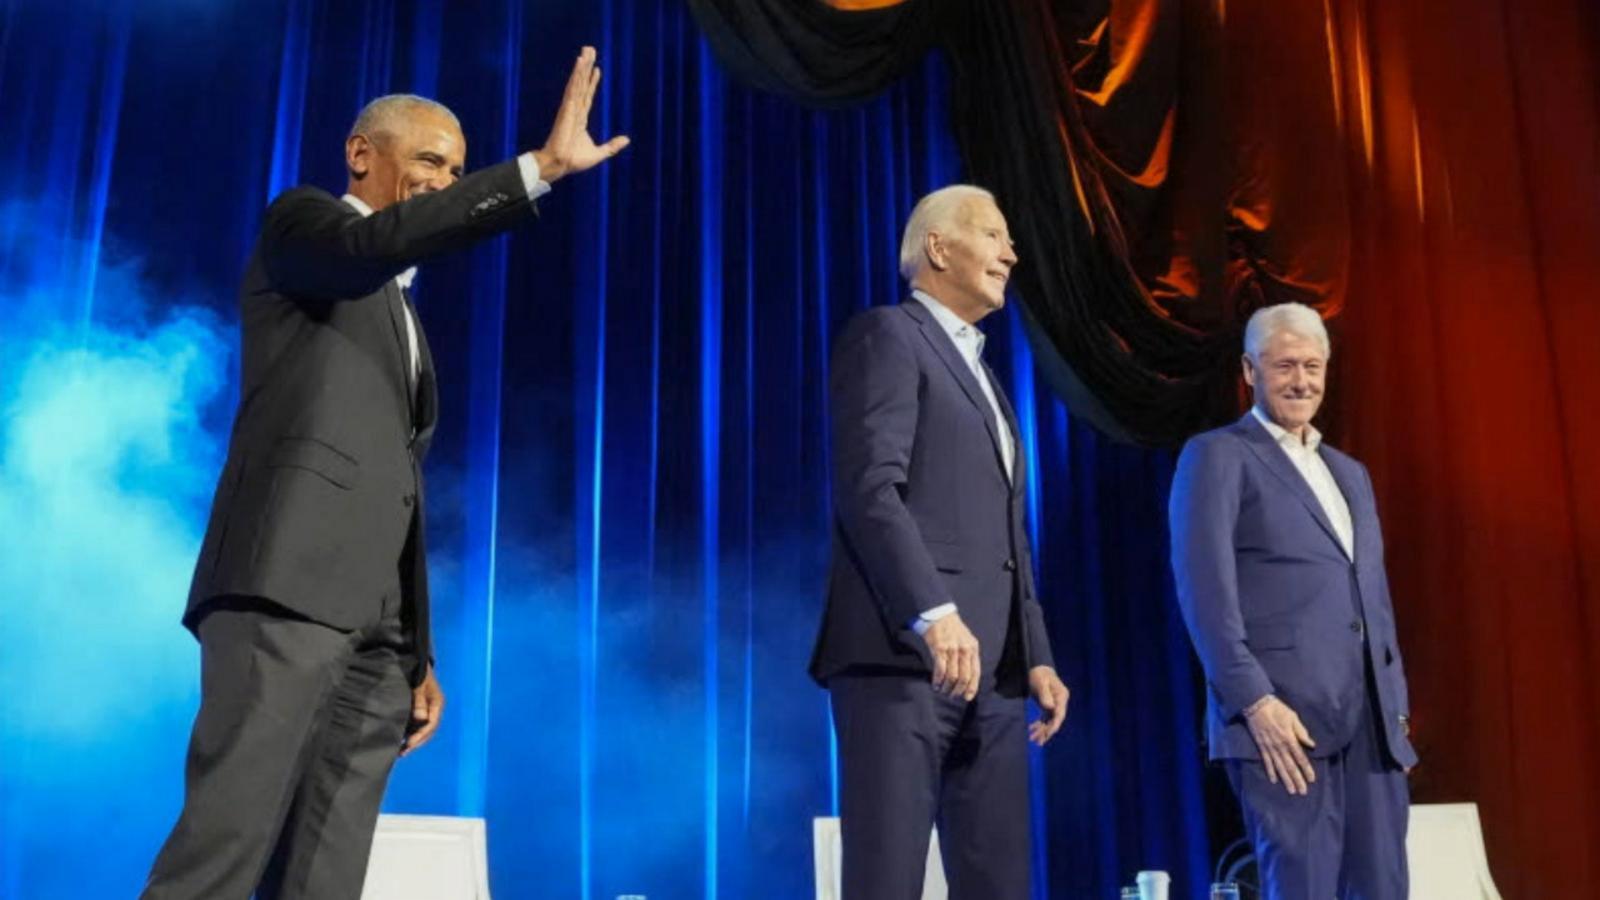 VIDEO: Presidents Biden, Clinton and Obama unite in NYC for election fundraiser